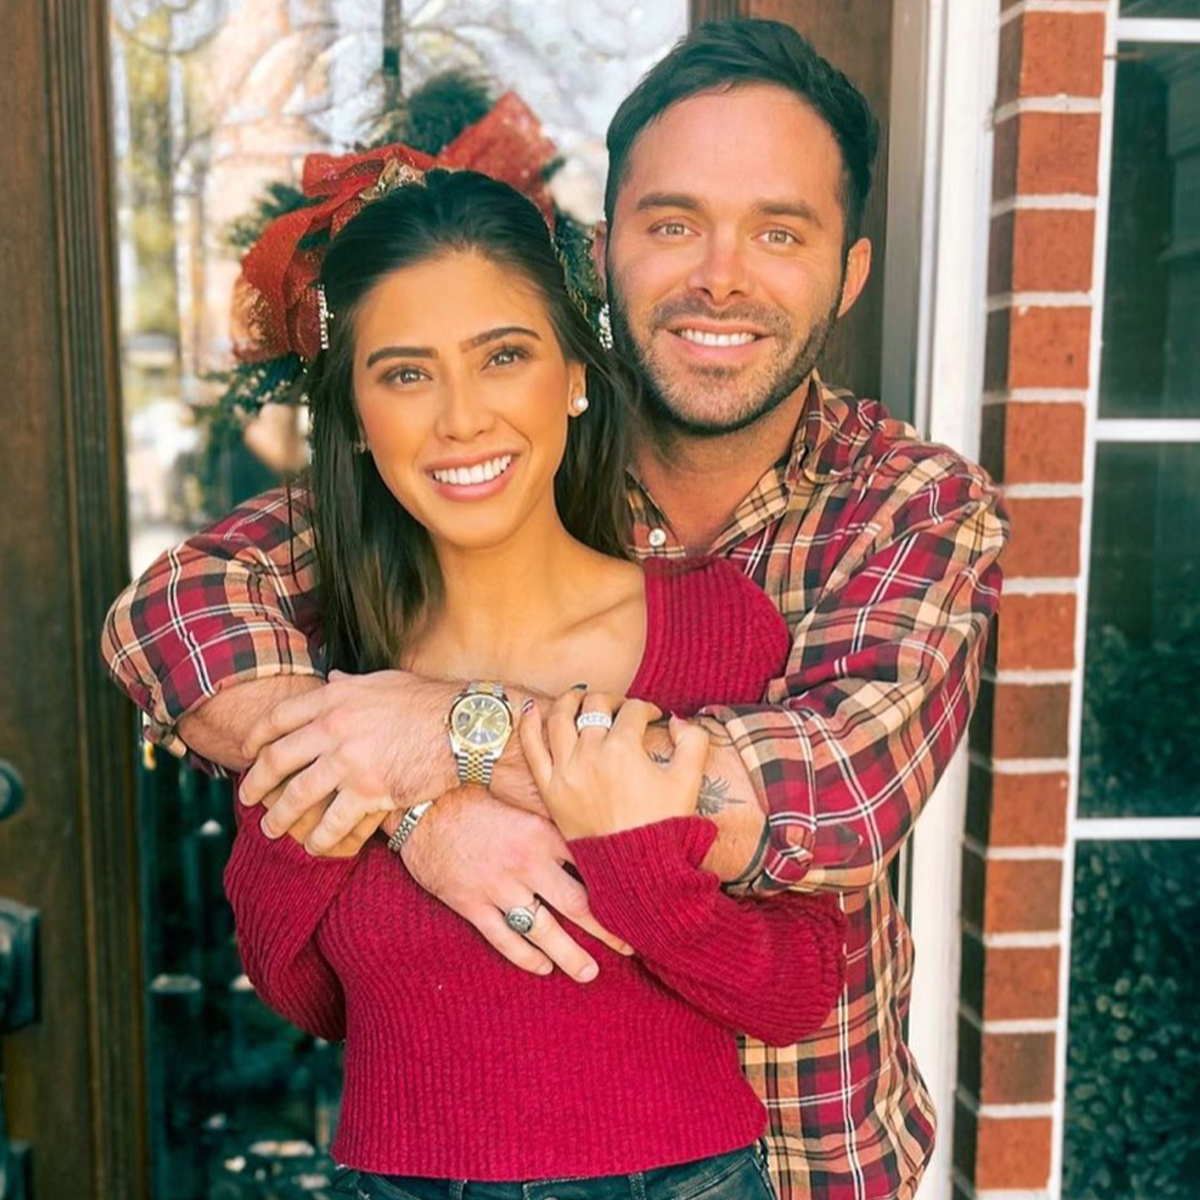 Pregnant The Ultimatum Star April Marie Reveals Sex of First Baby With Cody Cooper – E! Online